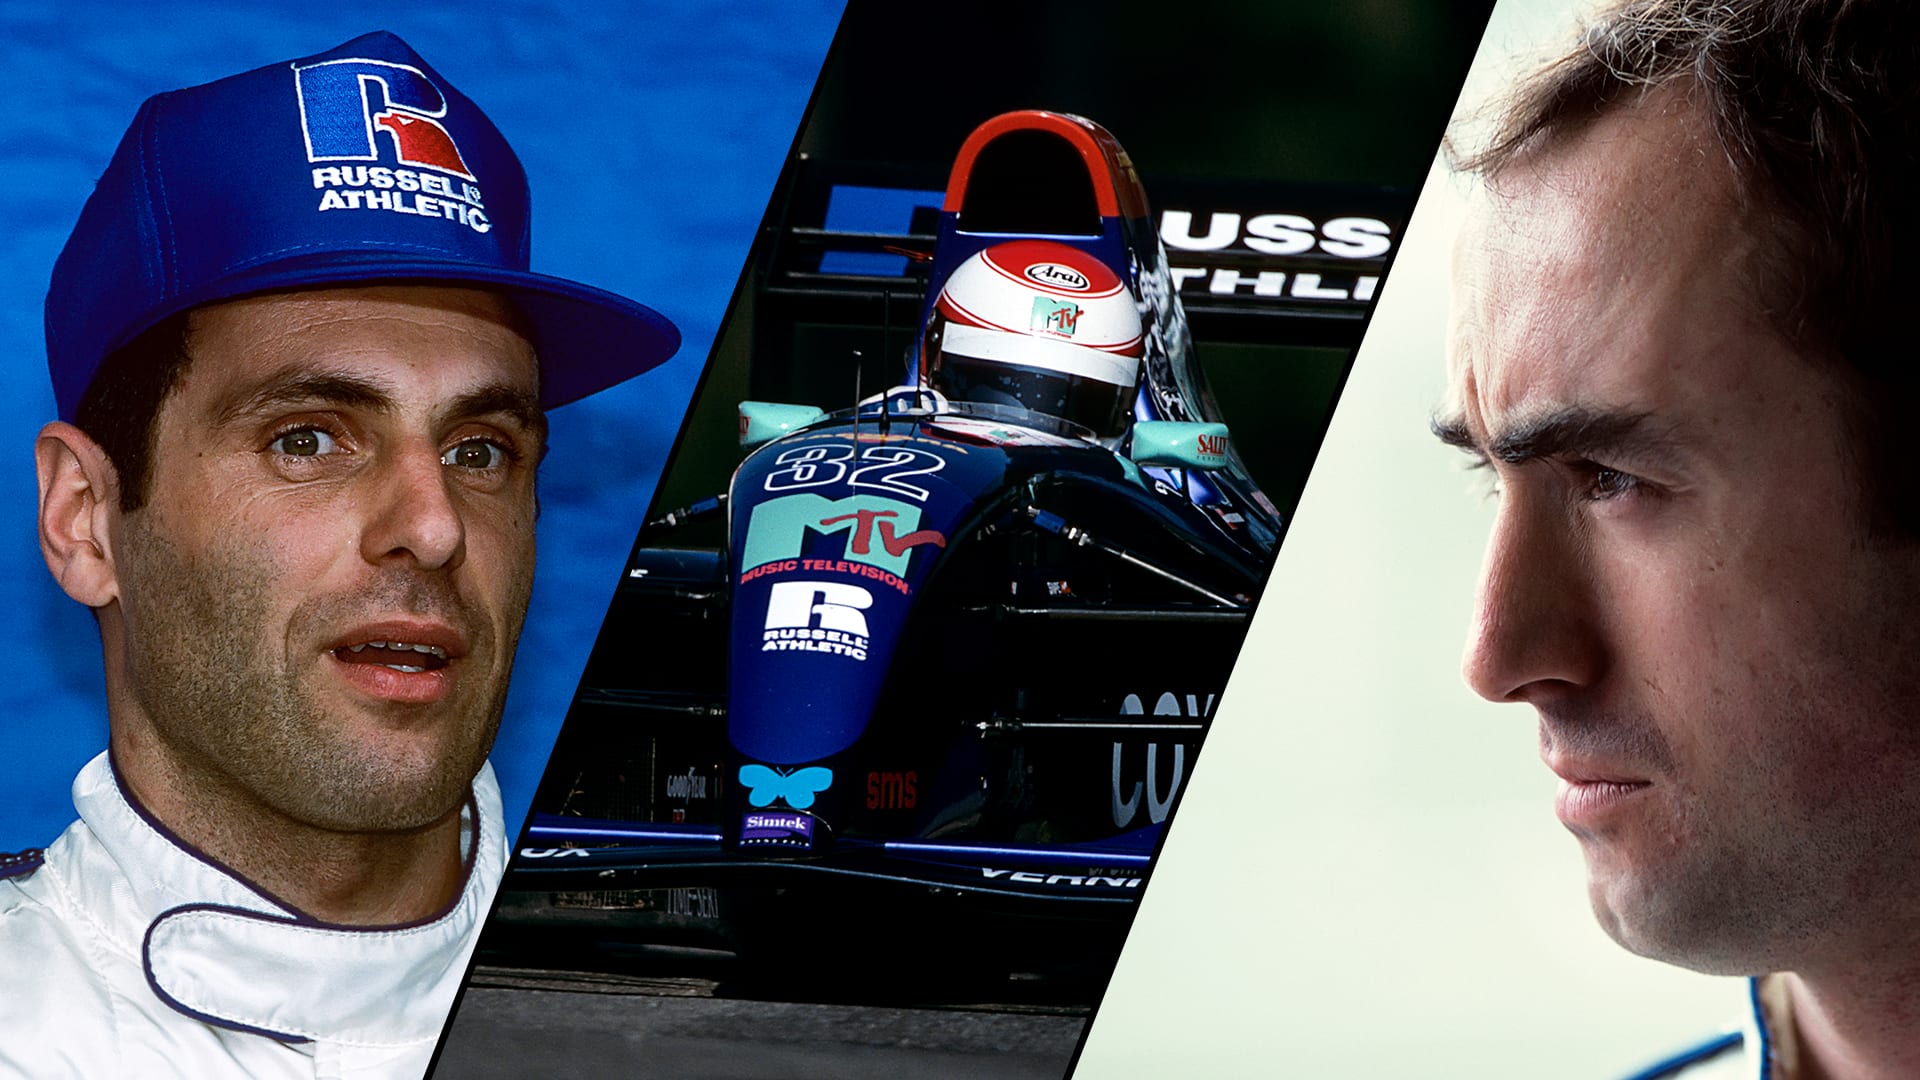 IN TRIBUTE: David Brabham remembers his former team mate, Roland Ratzenberger, 30 years on from the Austrian’s passing